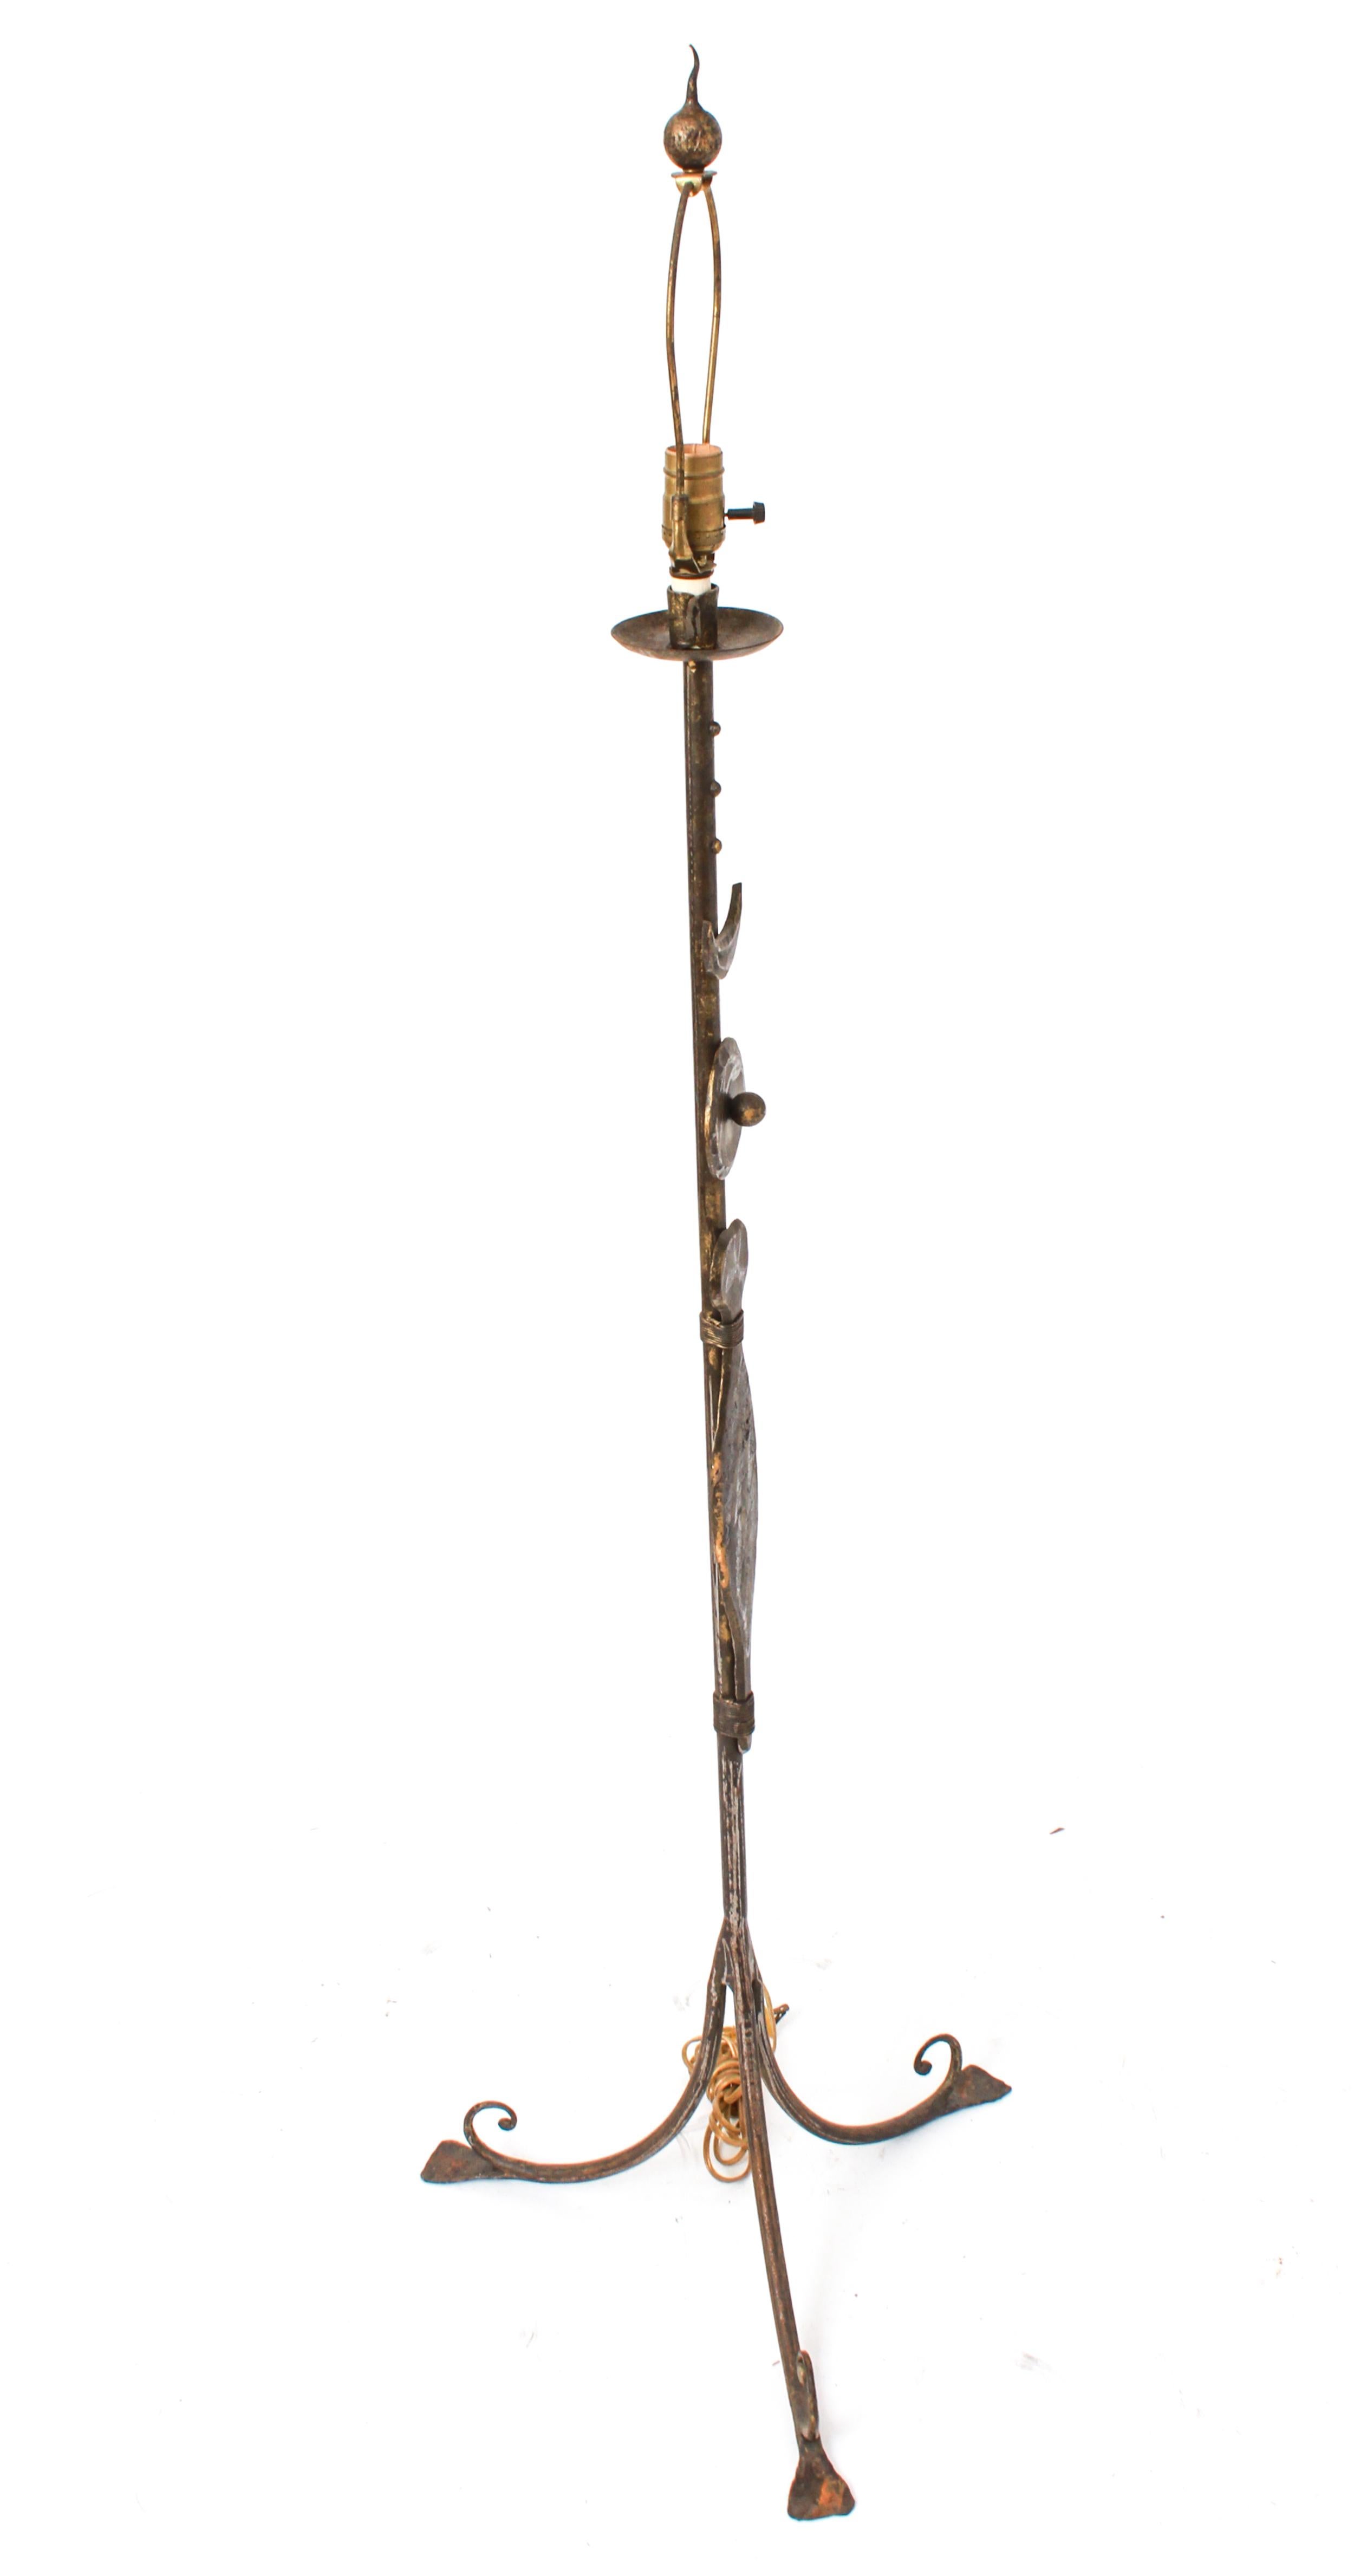 French modern brutalist floor lamp made in the style of Giacometti. The piece was made in France and has an illegible makers mark on the metal lamp base. In great vintage condition with age-appropriate wear and use.